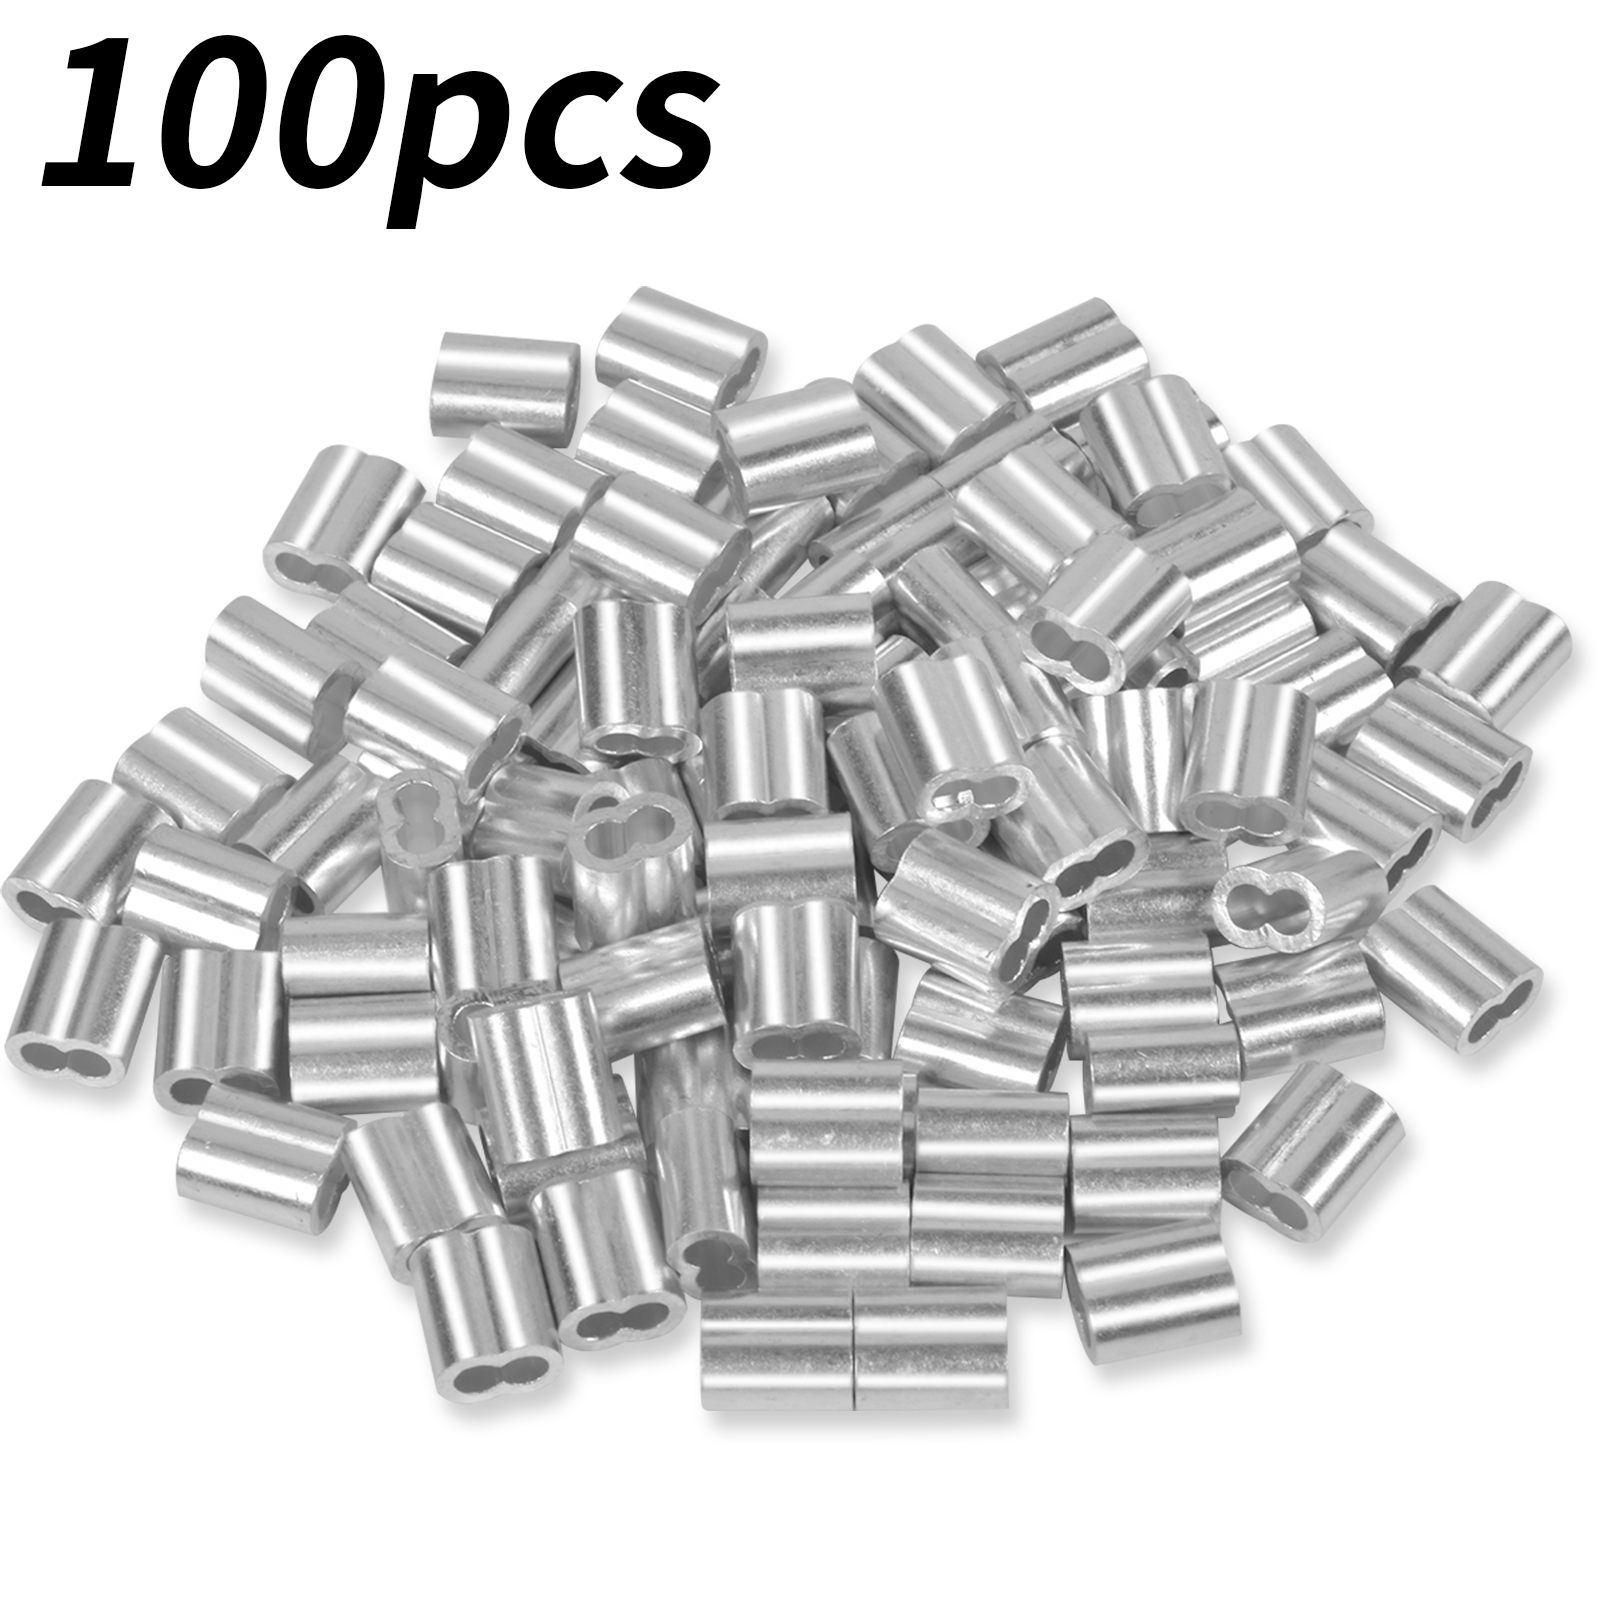 100pcs Aluminum Crimping Loop Sleeve Clips, Aluminum Sleeves Clip Fittings  With Double Ferrules, Aluminium Ferrules For Wire Rope, Cable Crimps